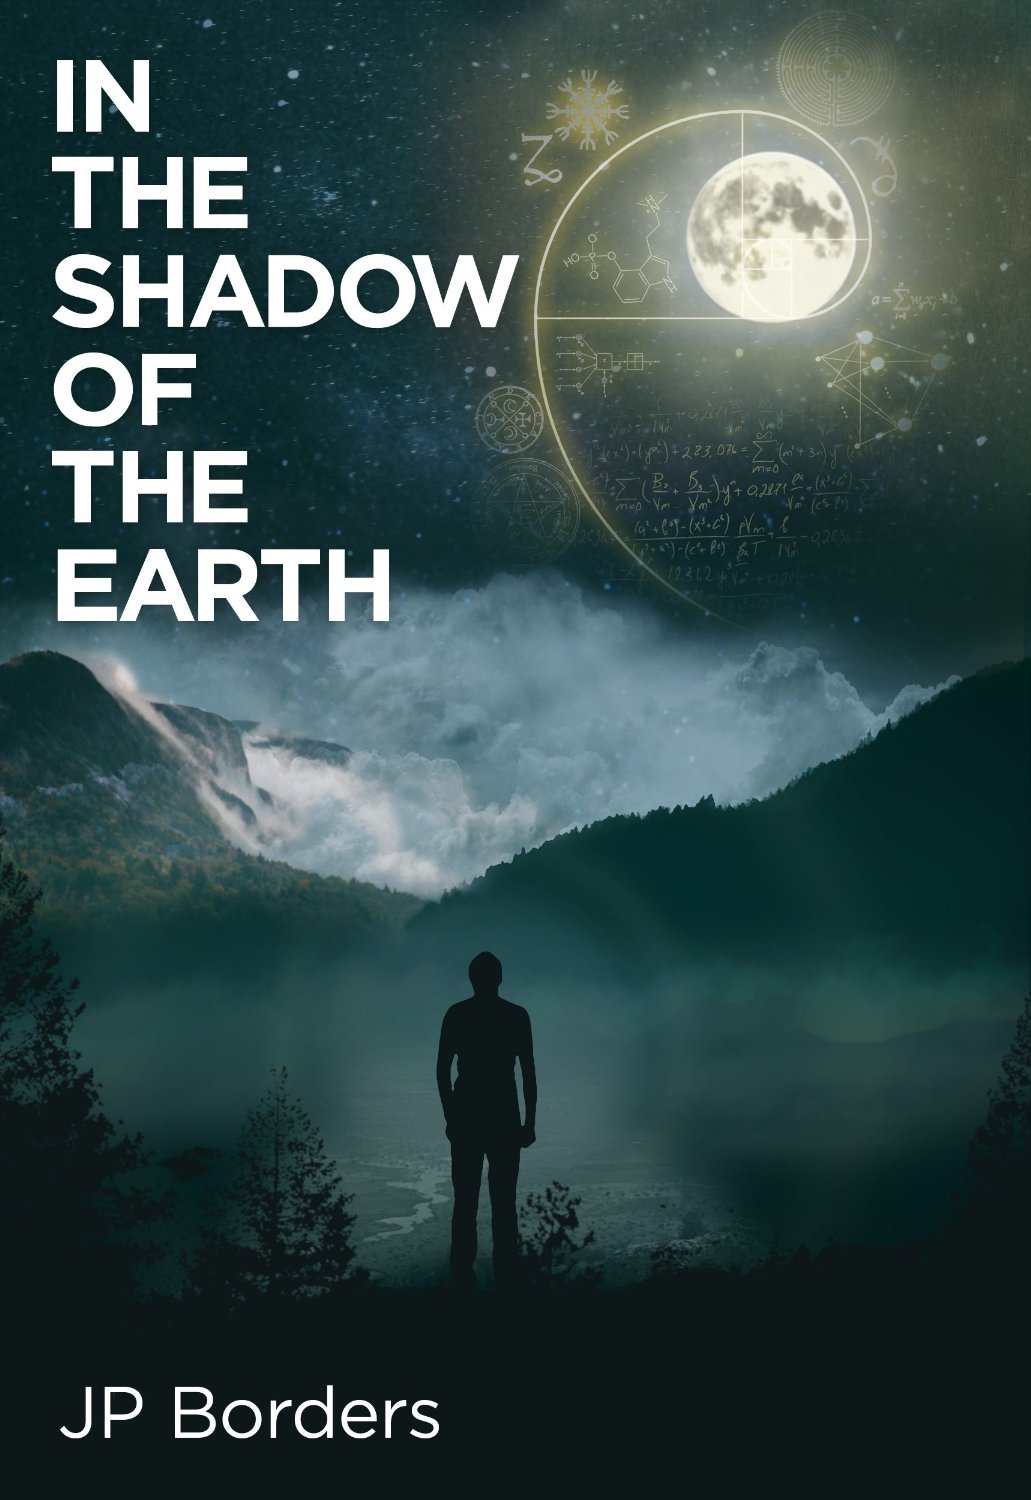 In the Shadow of the Earth by J. P. Borders